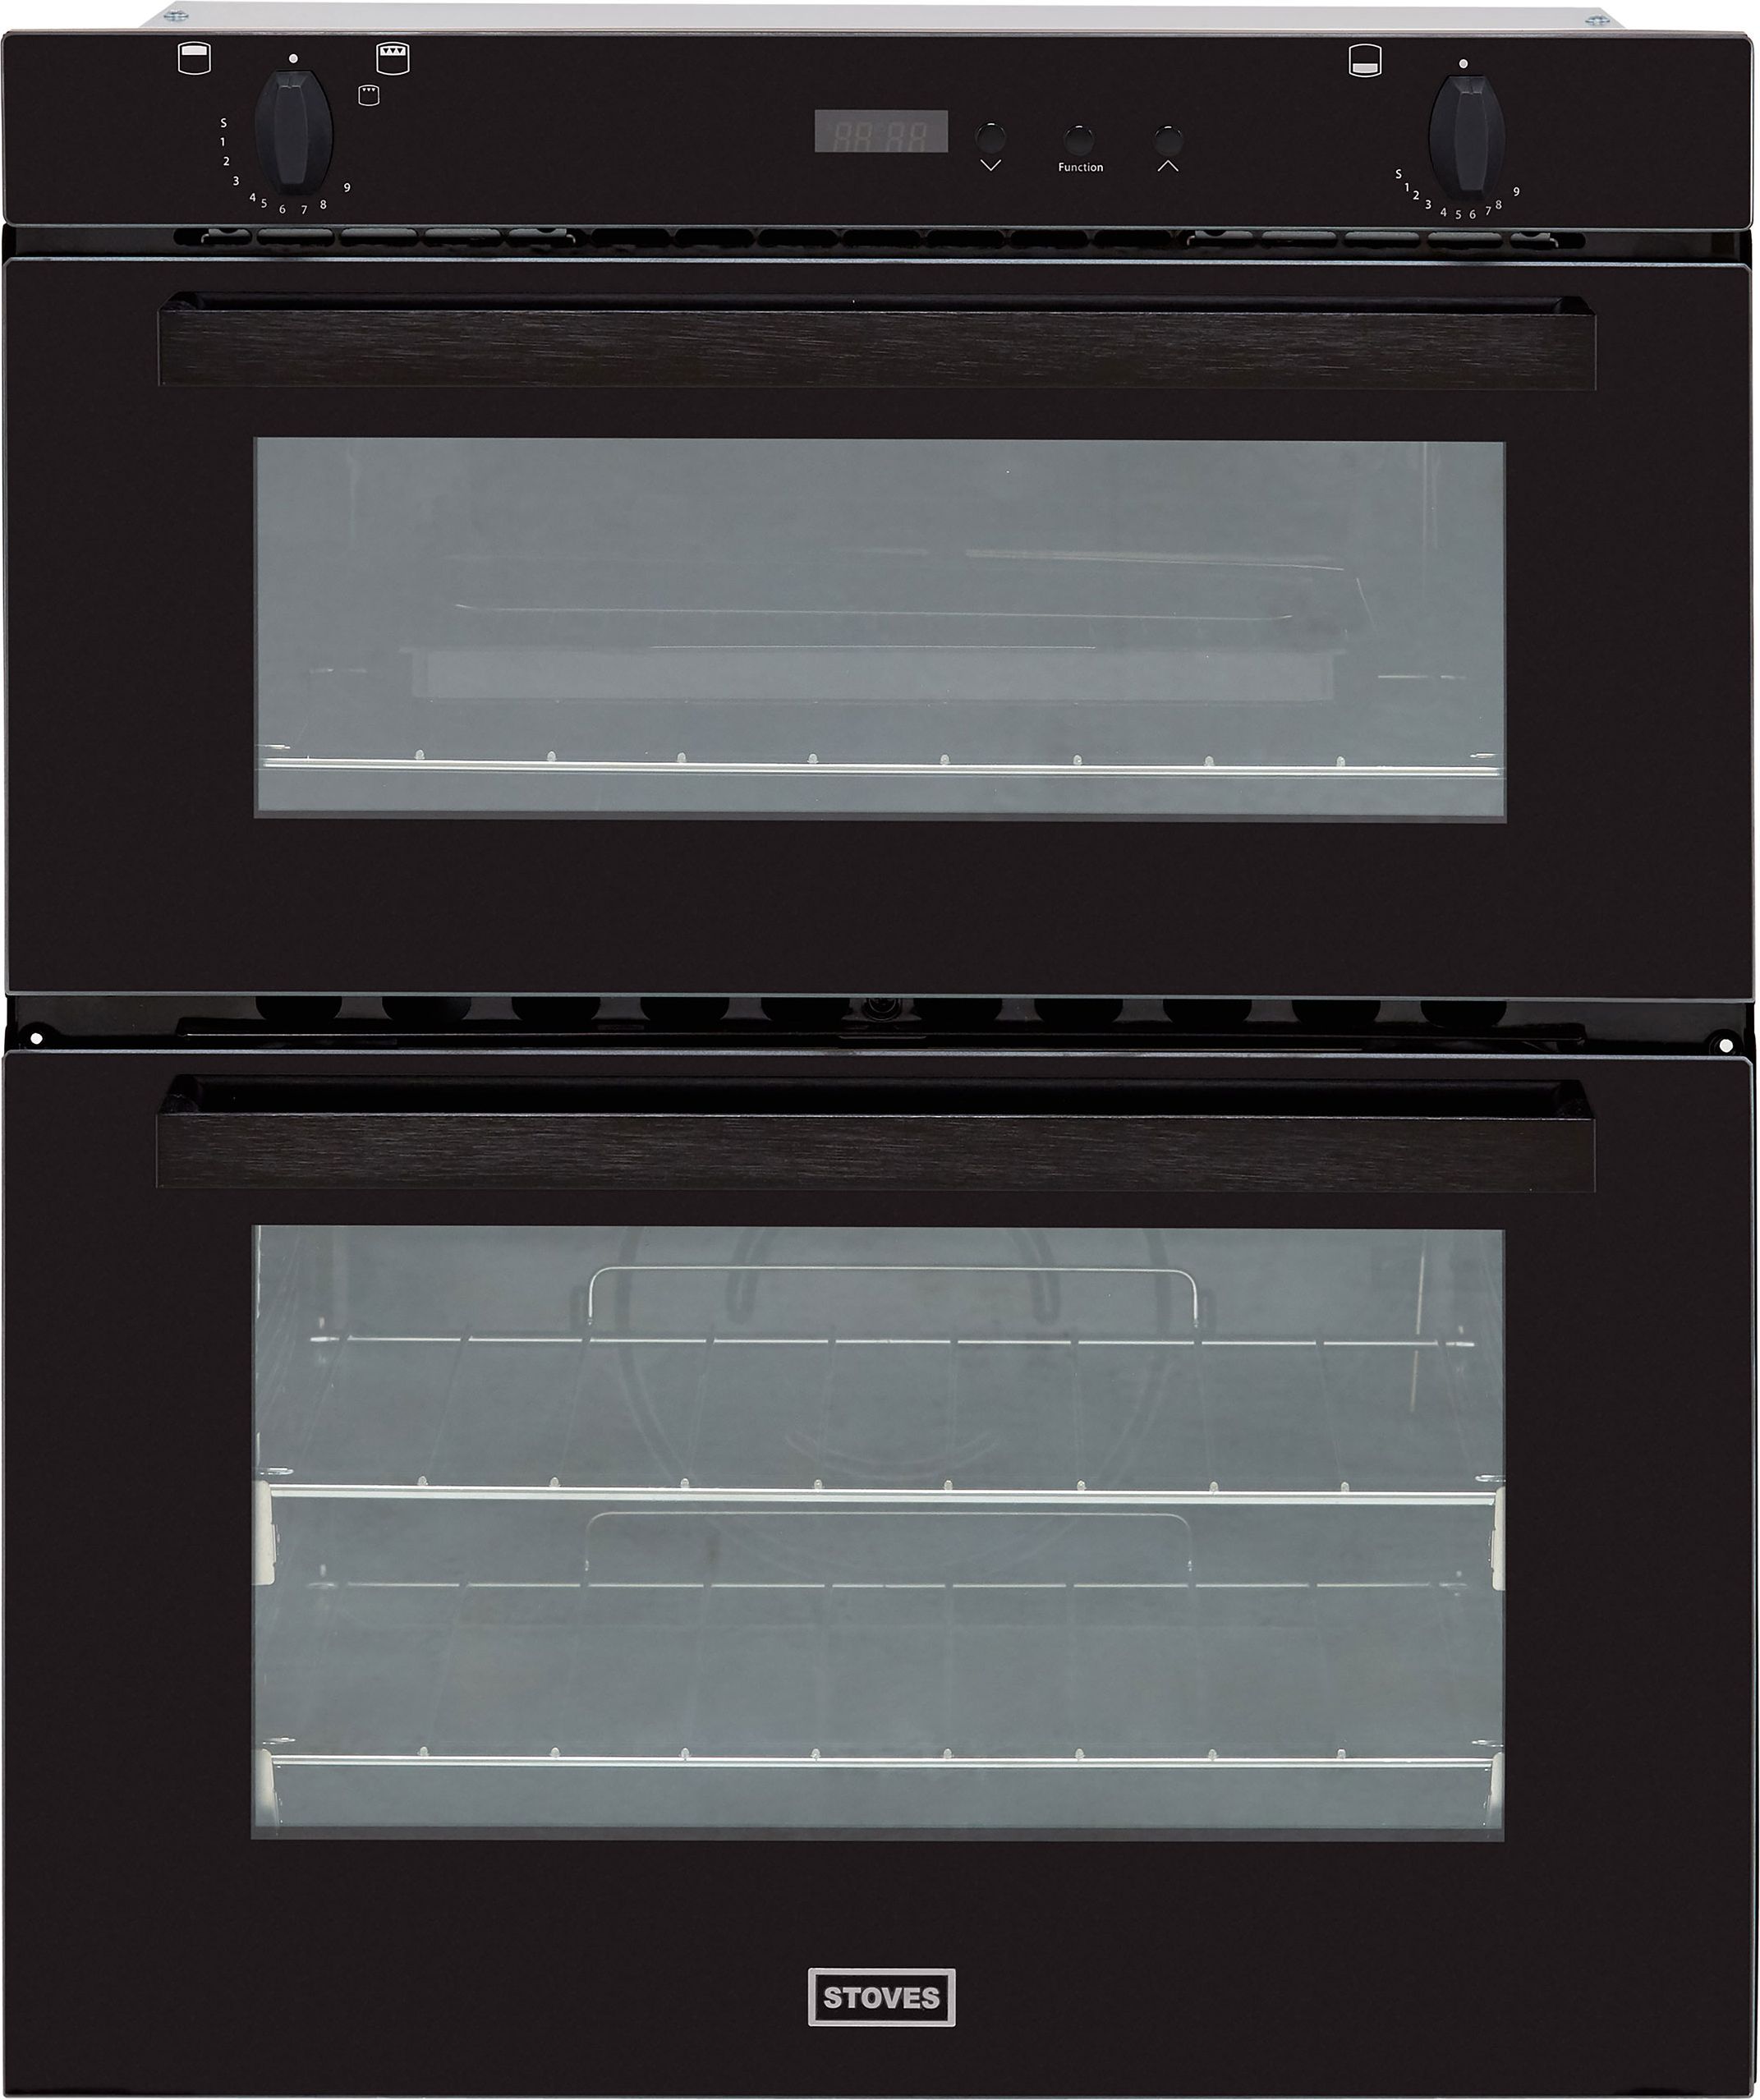 Stoves SGB700PS Built Under Gas Double Oven with Full Width Electric Grill - Black - A/A Rated, Black